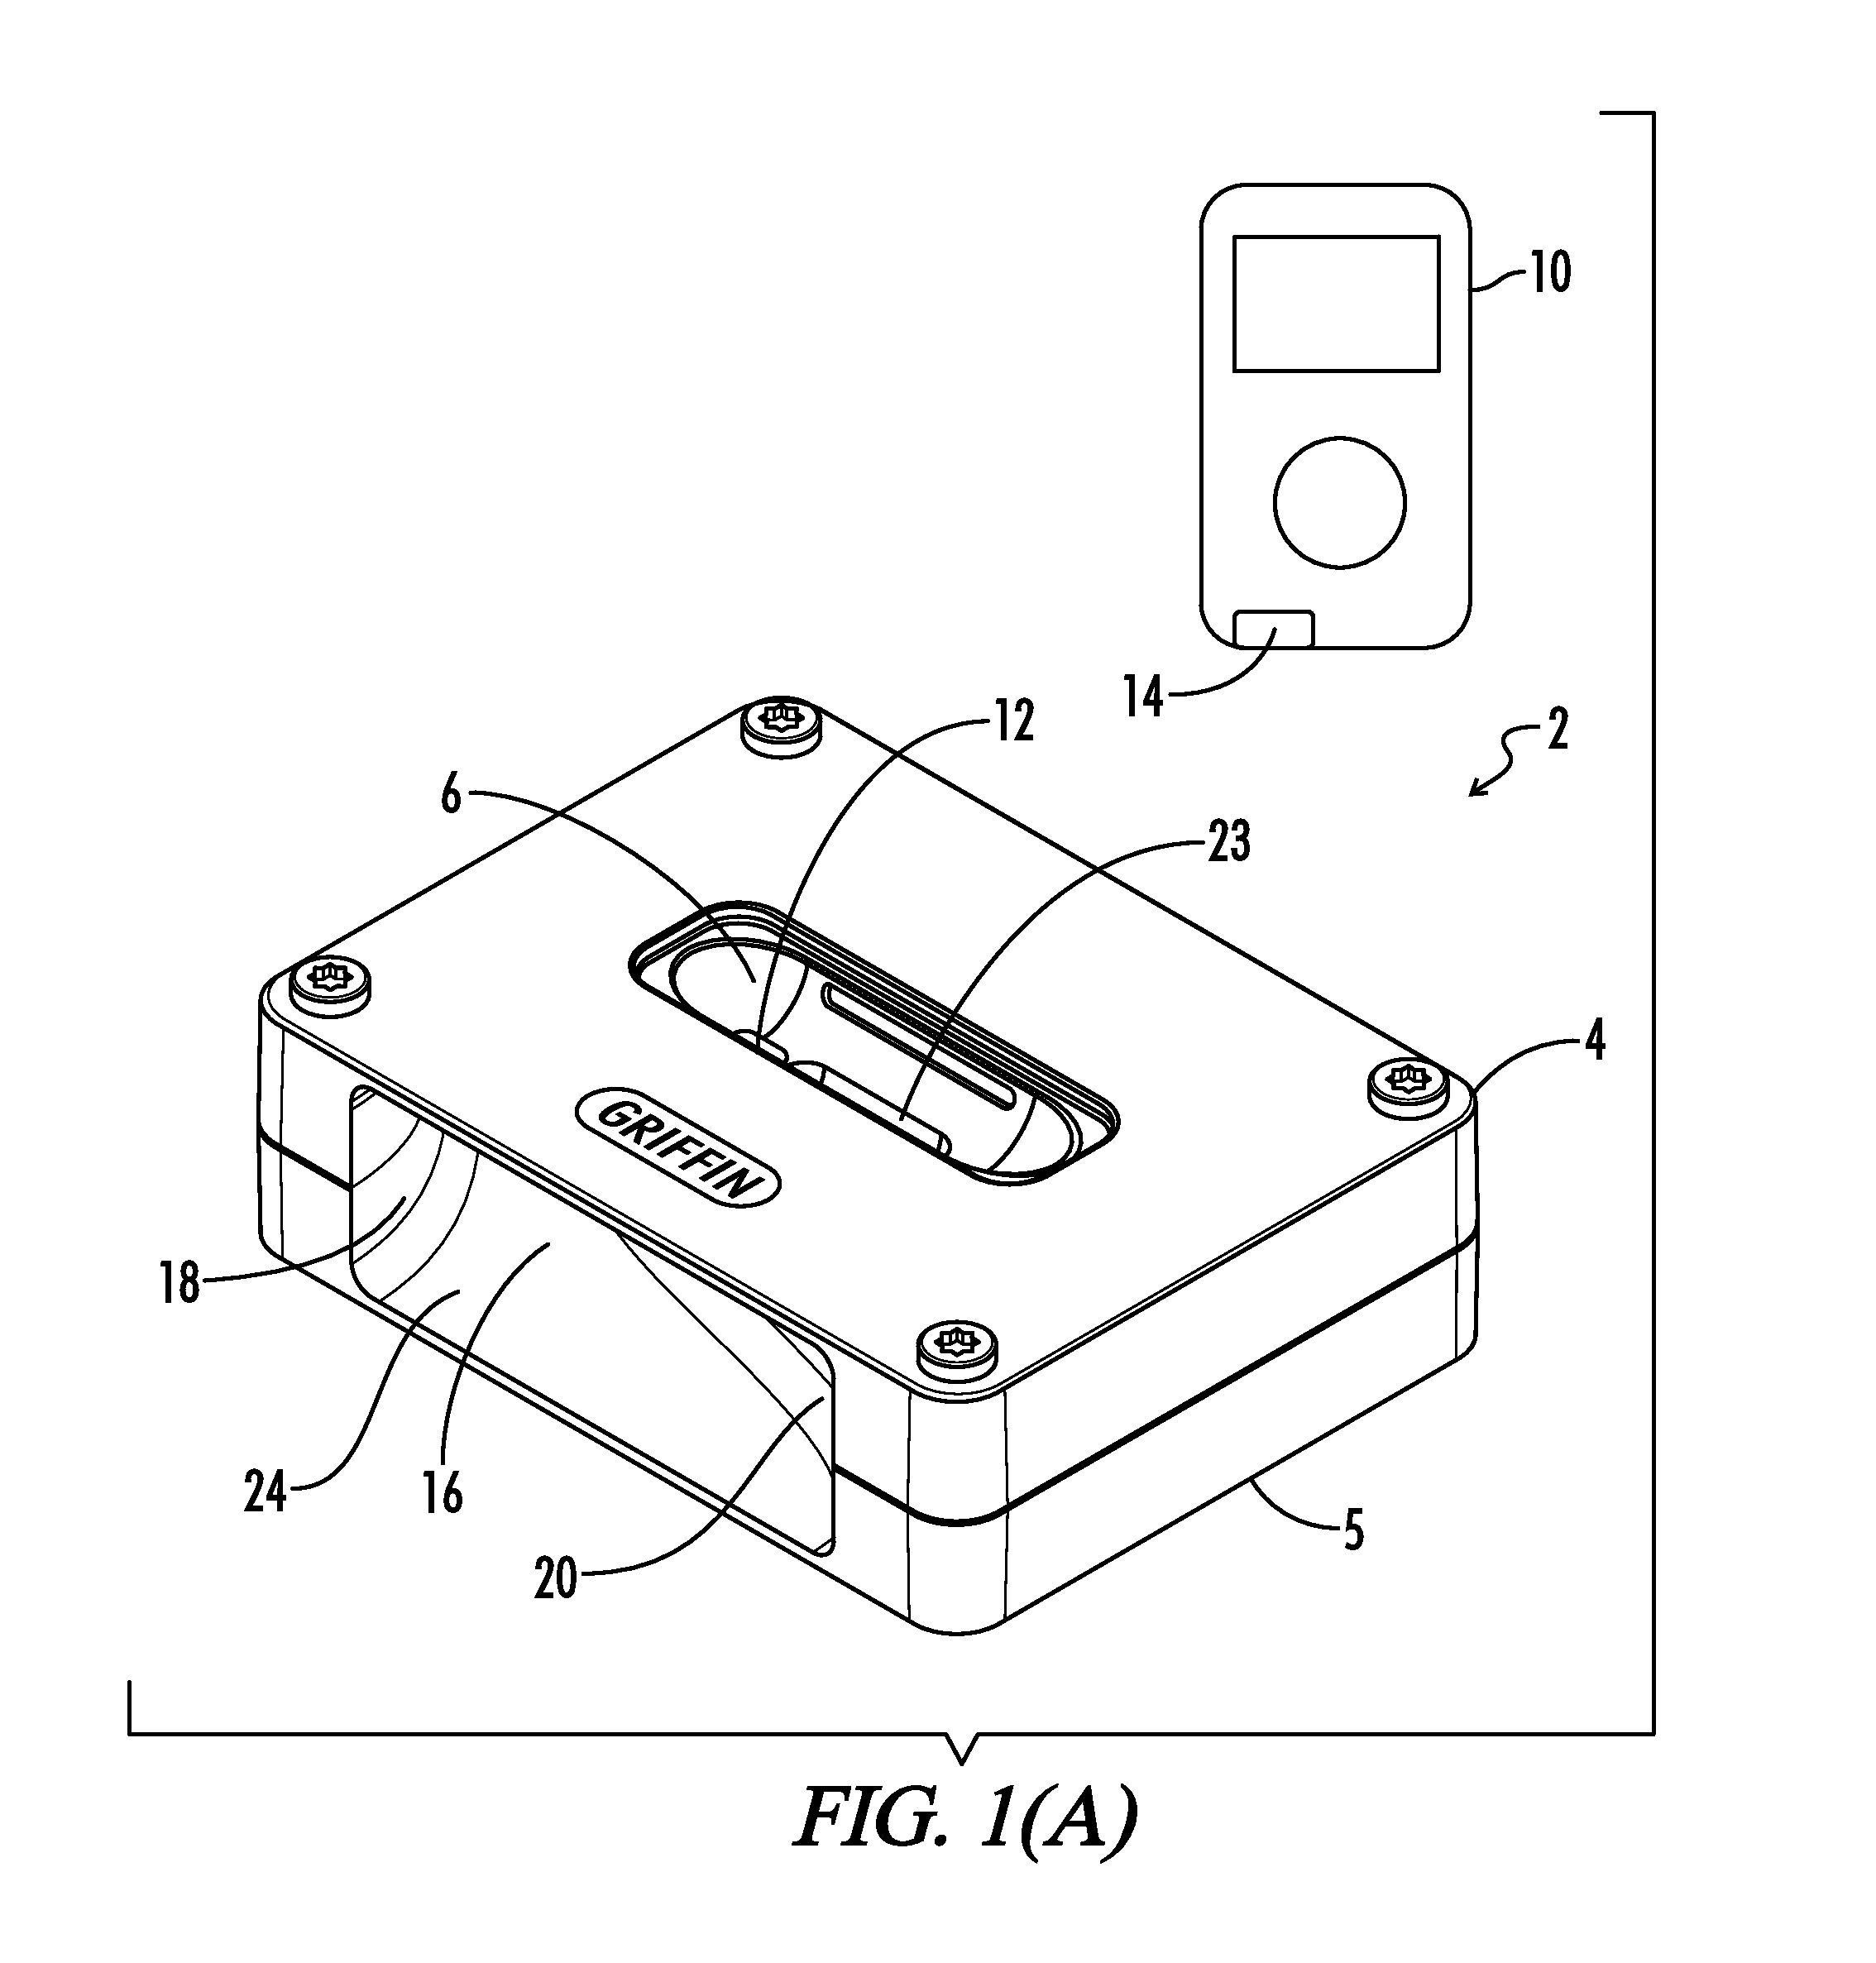 Acoustic dock for portable electronic device